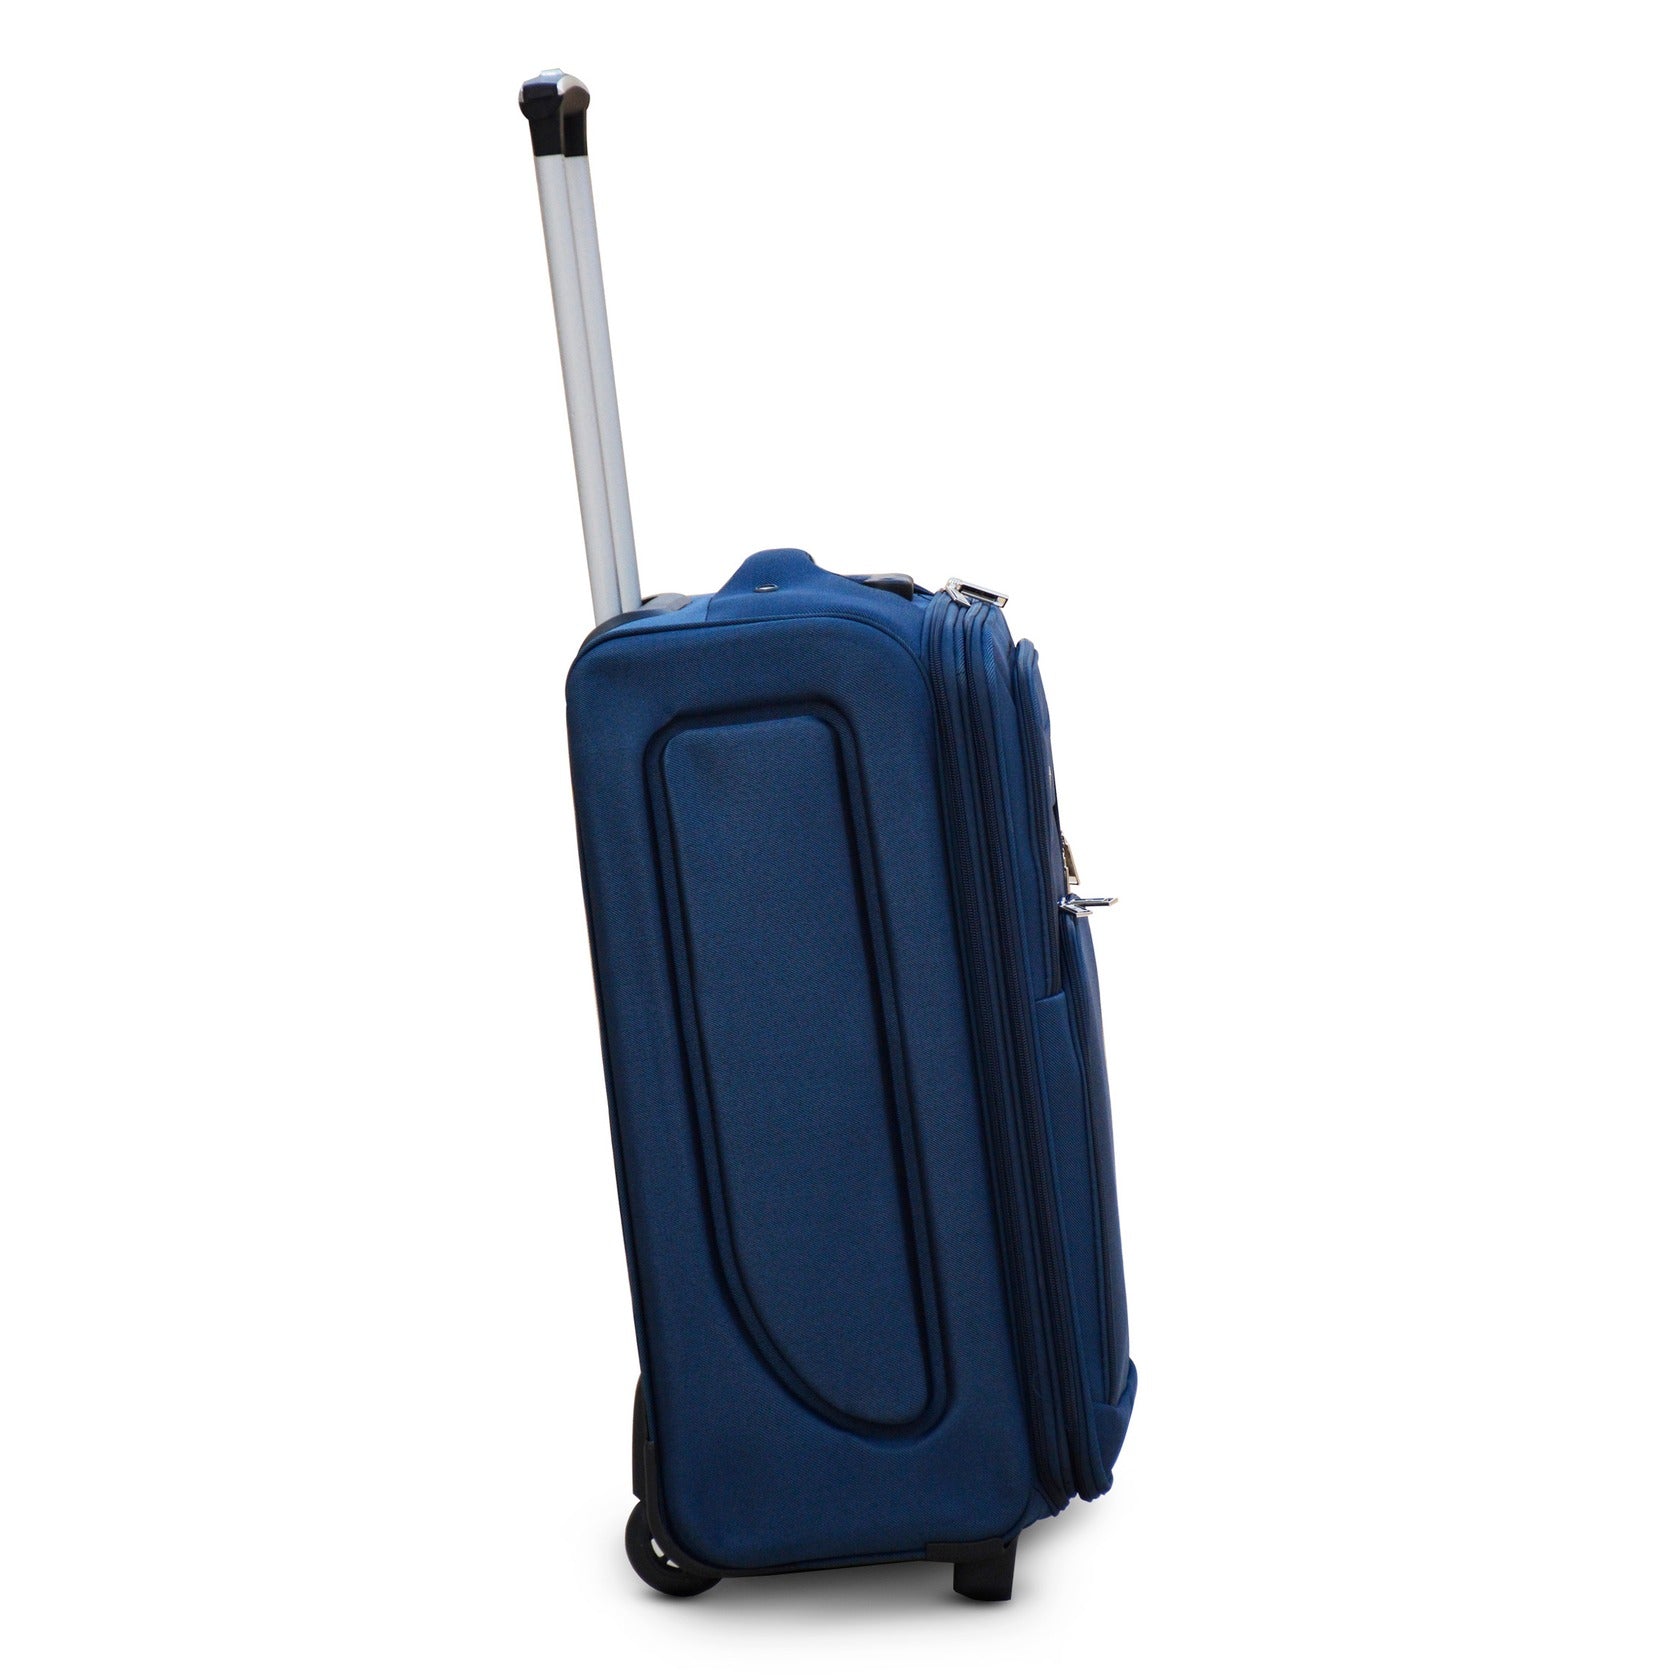 20" Blue Colour LP 2 Wheel 0161 Luggage Lightweight Soft Material Carry On Trolley Bag